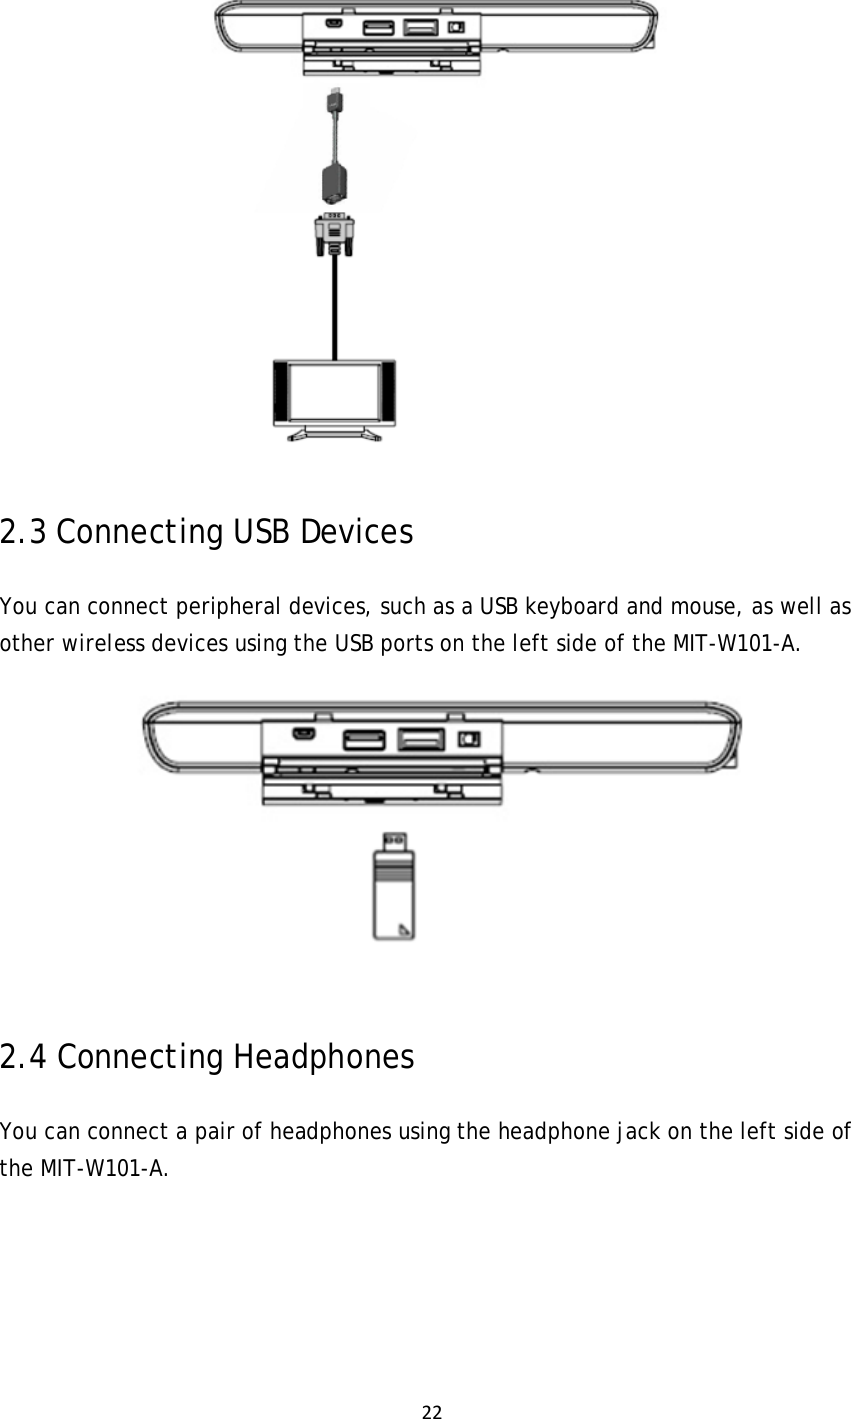 22 2.3 Connecting USB Devices You can connect peripheral devices, such as a USB keyboard and mouse, as well as other wireless devices using the USB ports on the left side of the MIT-W101-A.  2.4 Connecting Headphones You can connect a pair of headphones using the headphone jack on the left side of the MIT-W101-A. 